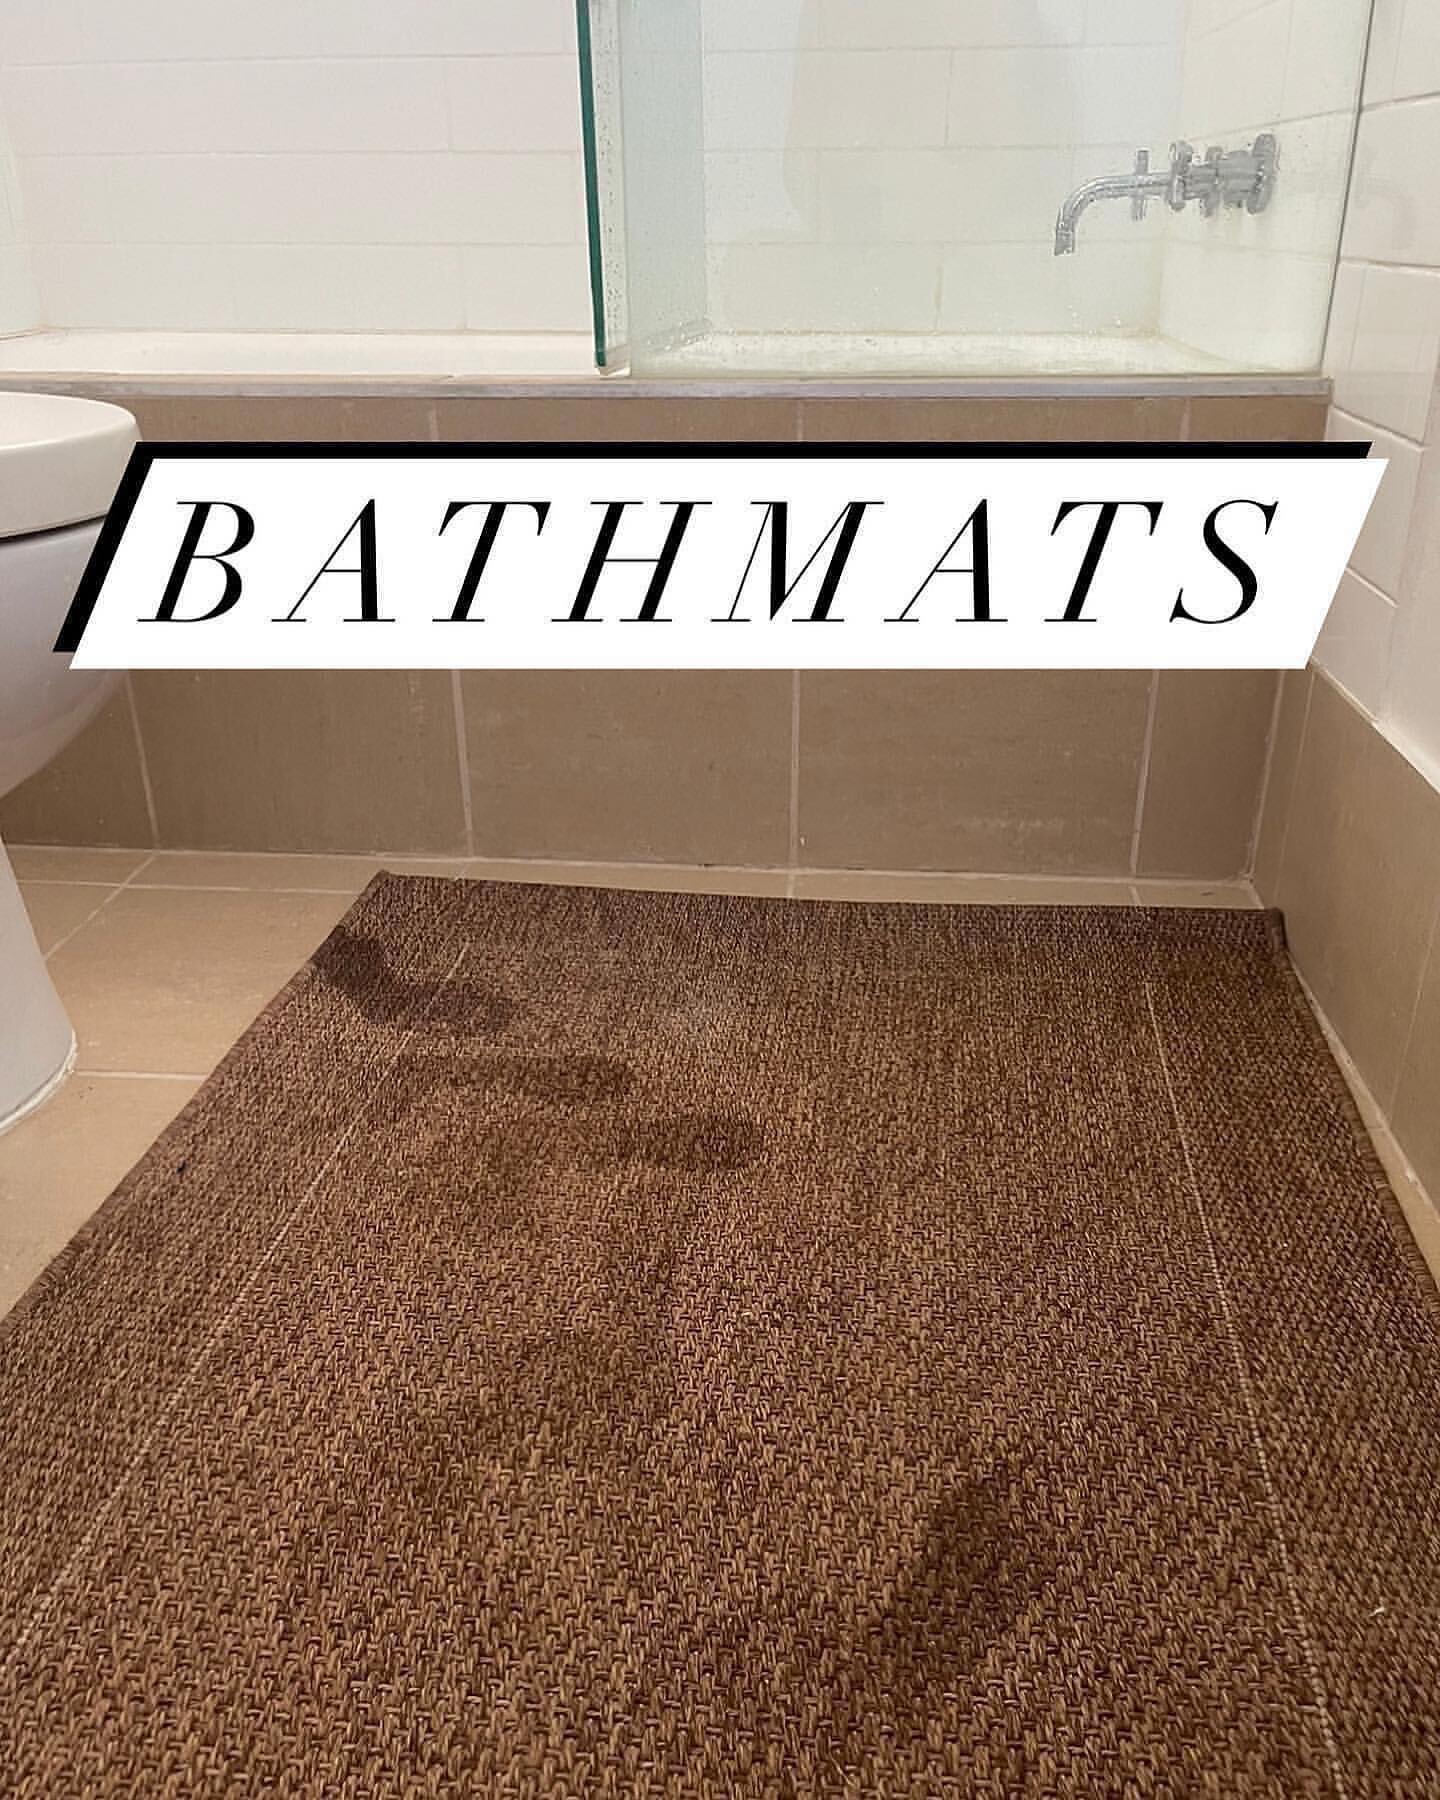 ▪️
W E T  F E E T
We use our rugs as BATHMATS
▪️▪️
W H Y? 
Because our rugs
▪️Dry fast
▪️Look fabulous
▪️can be custom made to size
▪️take outside &amp; hose to clean
▪️Don&rsquo;t look shabbie after spending too much time in the dryer
📞 Jo if you w